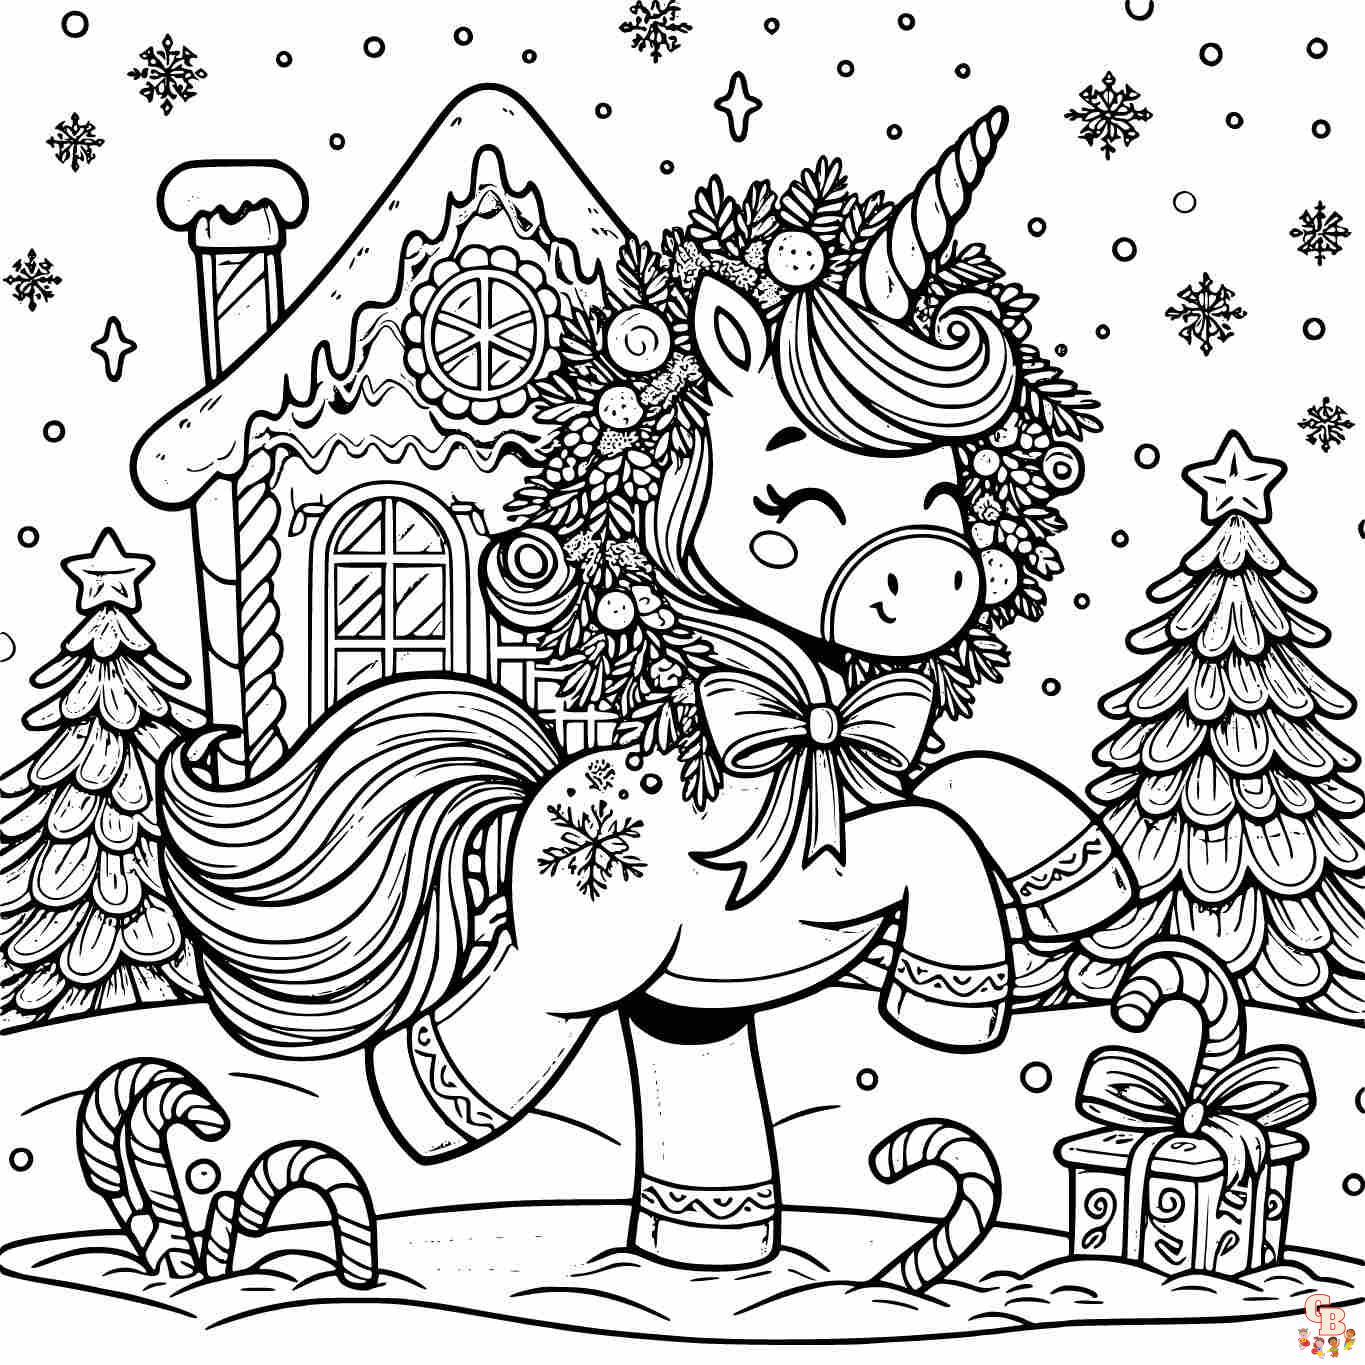 unicorn christmas coloring pages